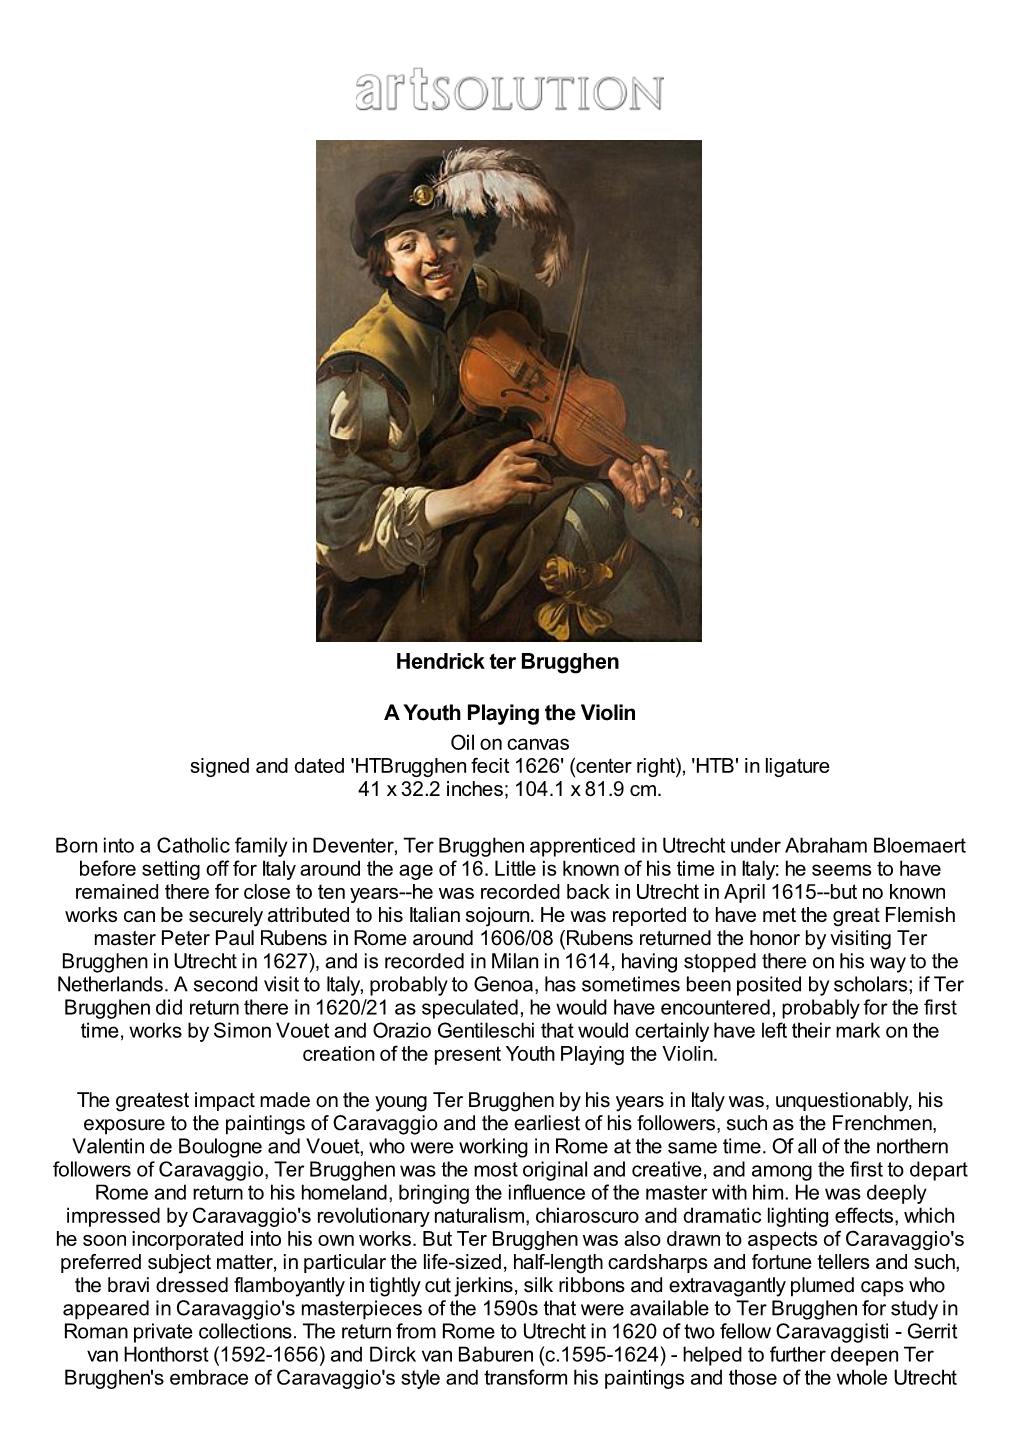 A Youth Playing the Violin Oil on Canvas Signed and Dated 'Htbrugghen Fecit 1626' (Center Right), 'HTB' in Ligature 41 X 32.2 Inches; 104.1 X 81.9 Cm